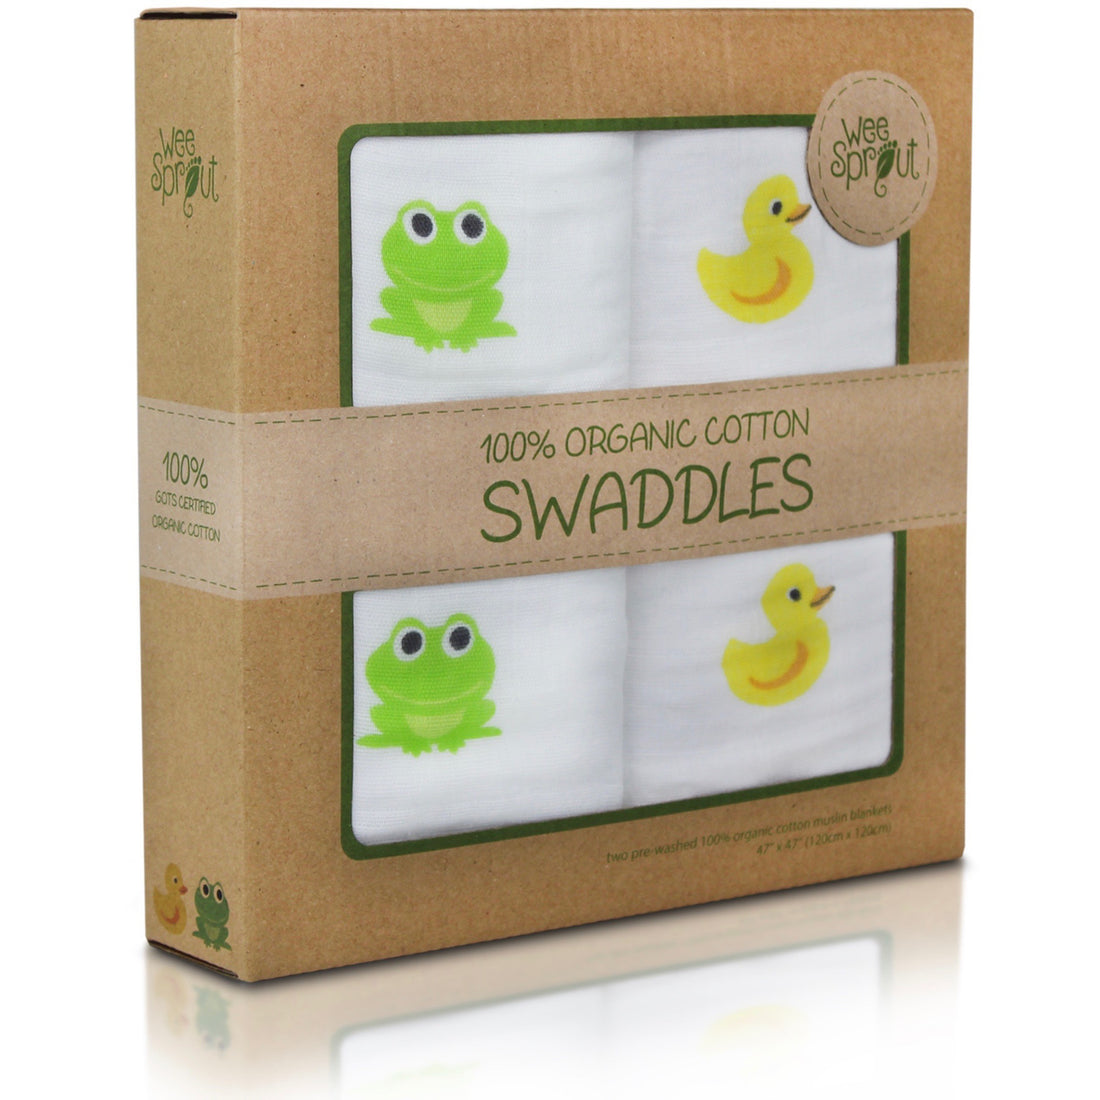 Package of Organic cotton swaddle blankets